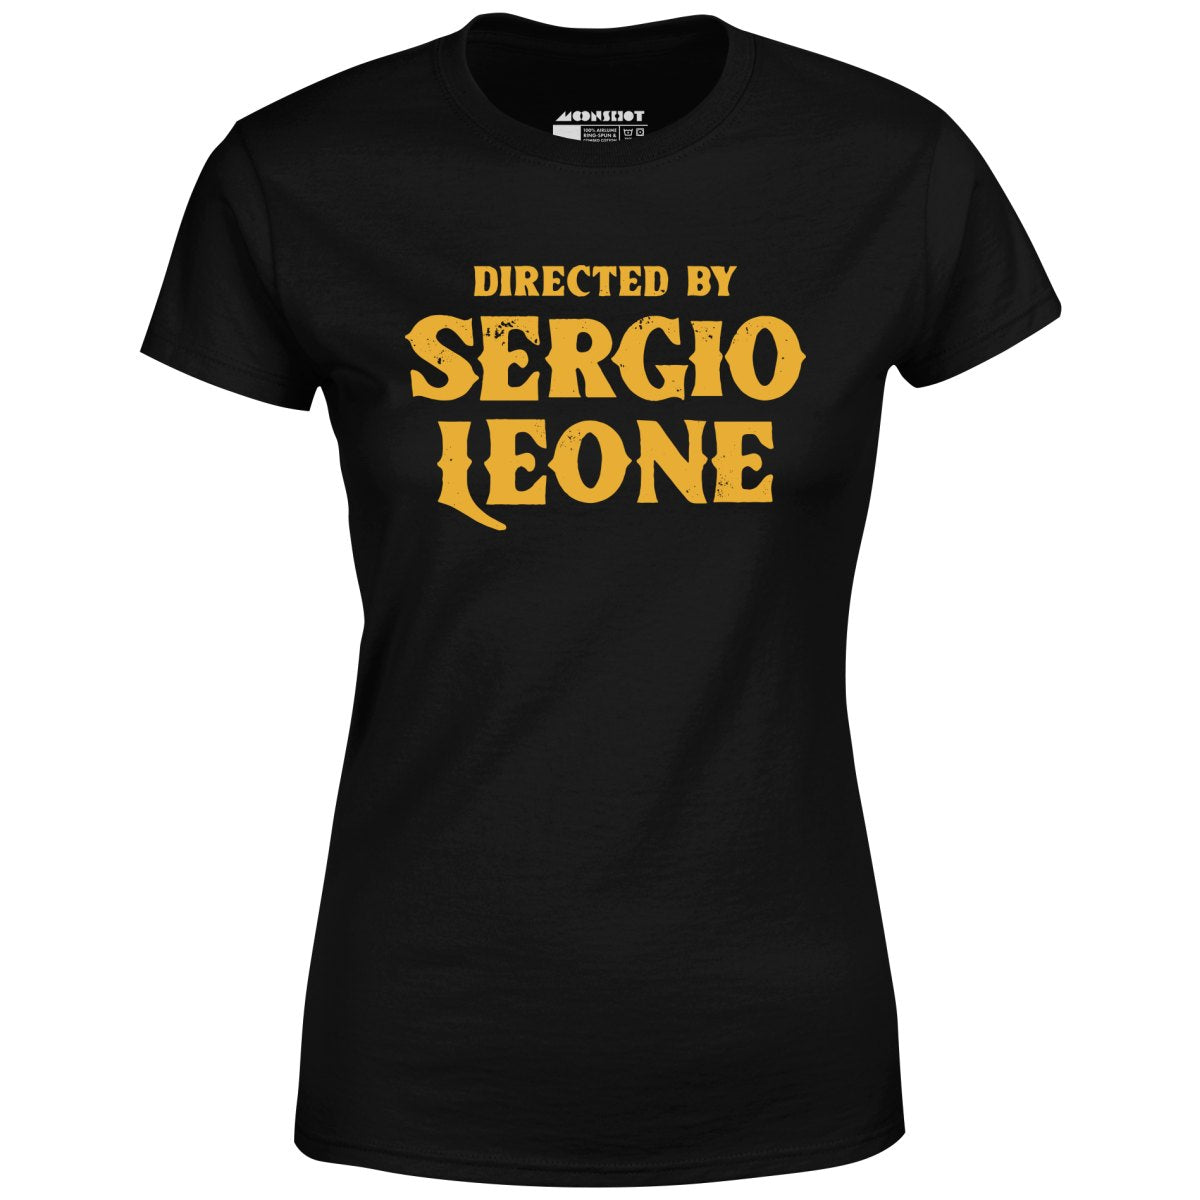 Directed By Sergio Leone - Women's T-Shirt